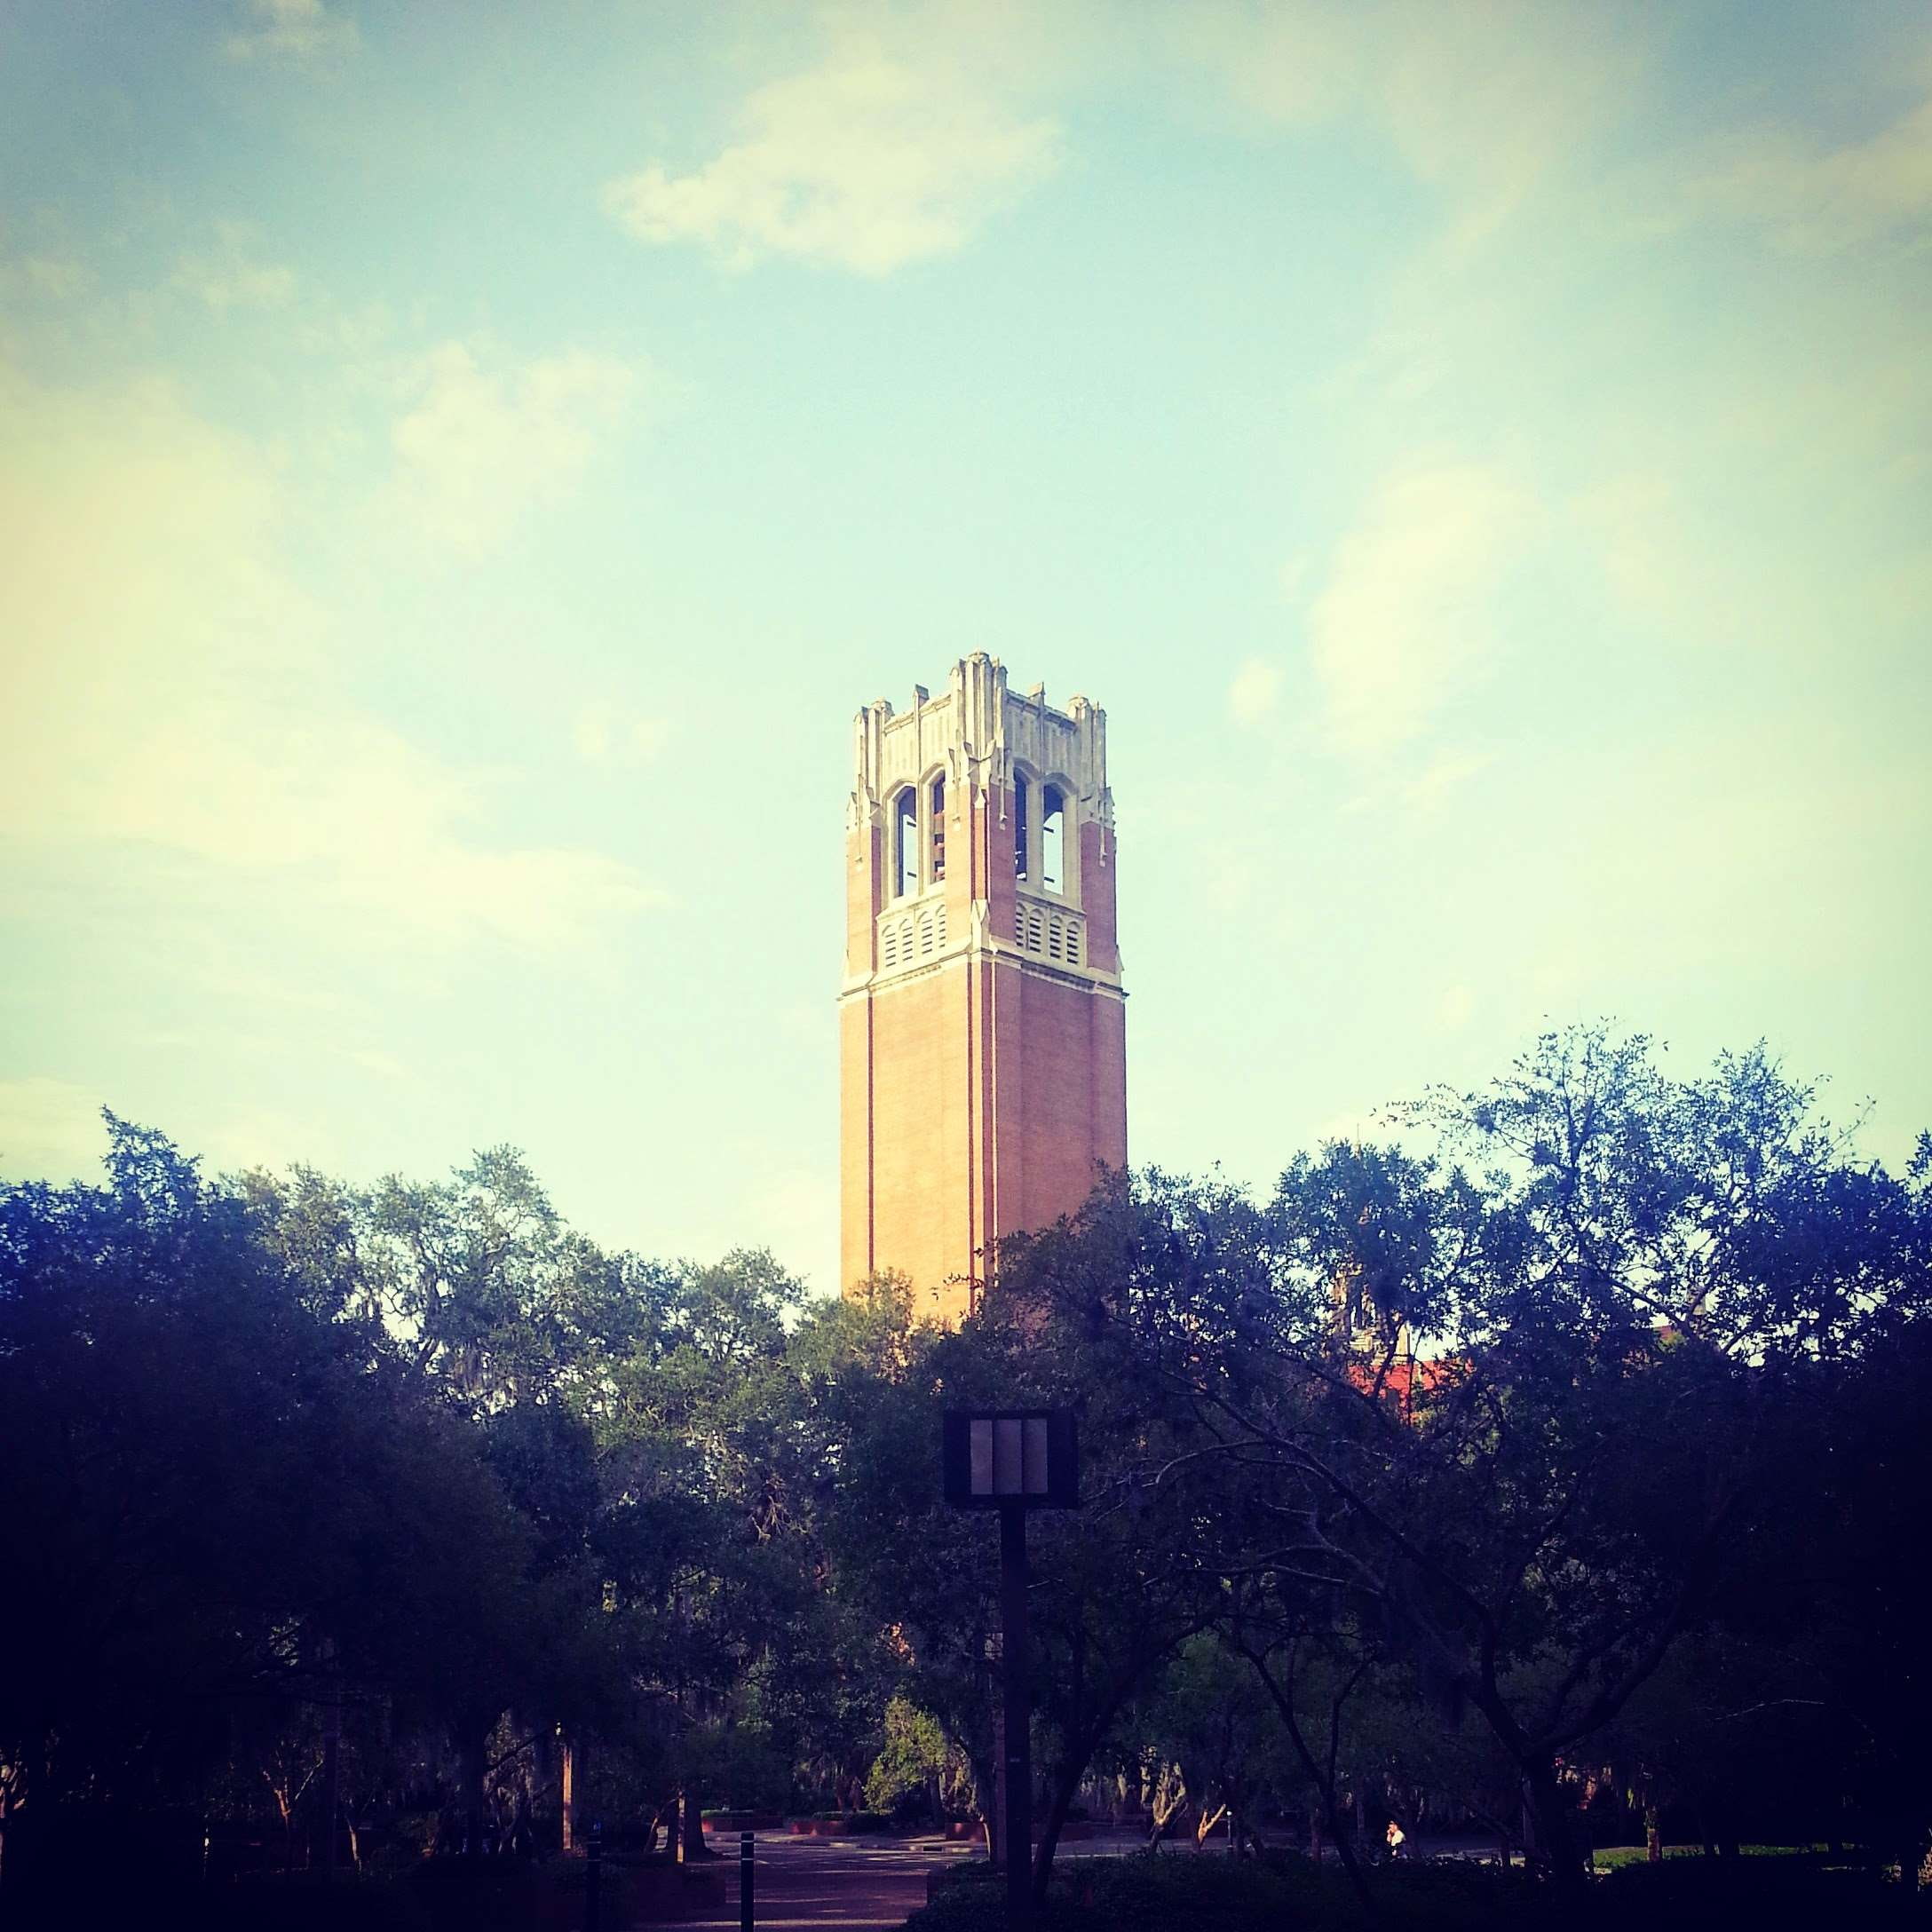 century tower, clouds, trees, university of florida, architecture